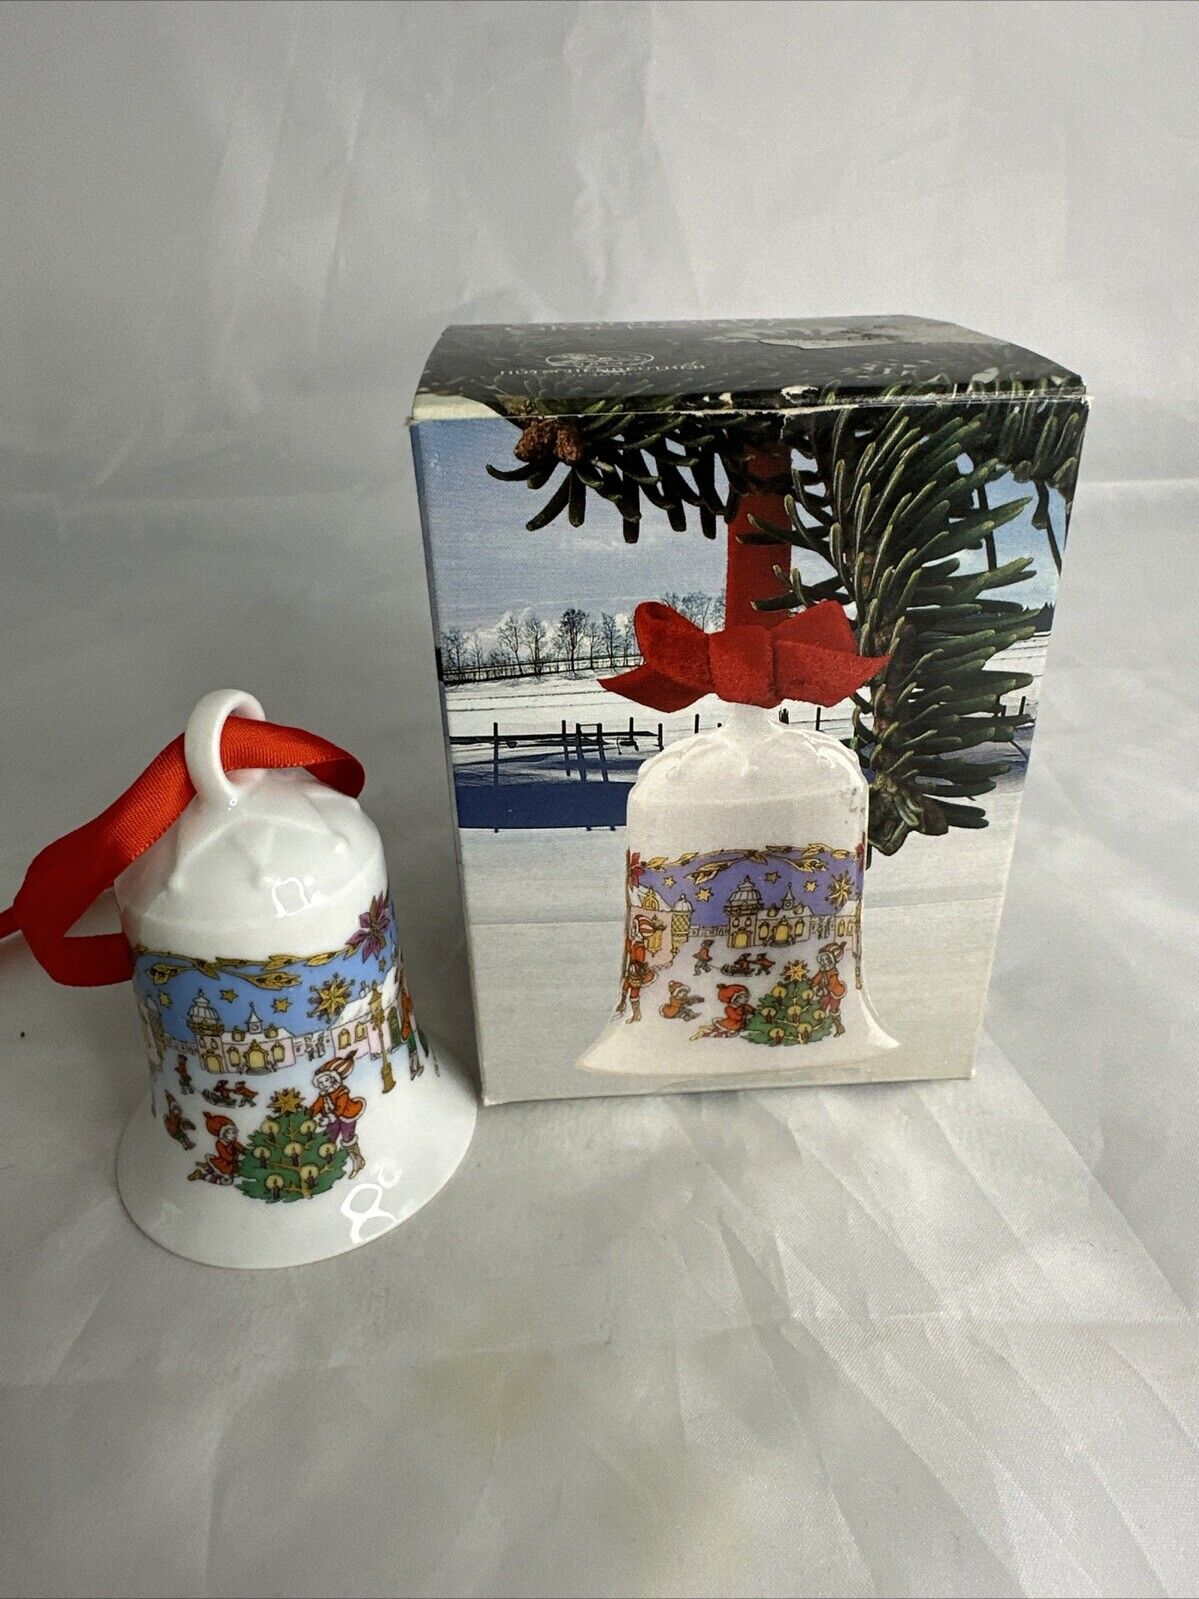 Hutschenreuther Weihnachts-Glocke 1987 Bell Ornament Signed Ole Winther In Box